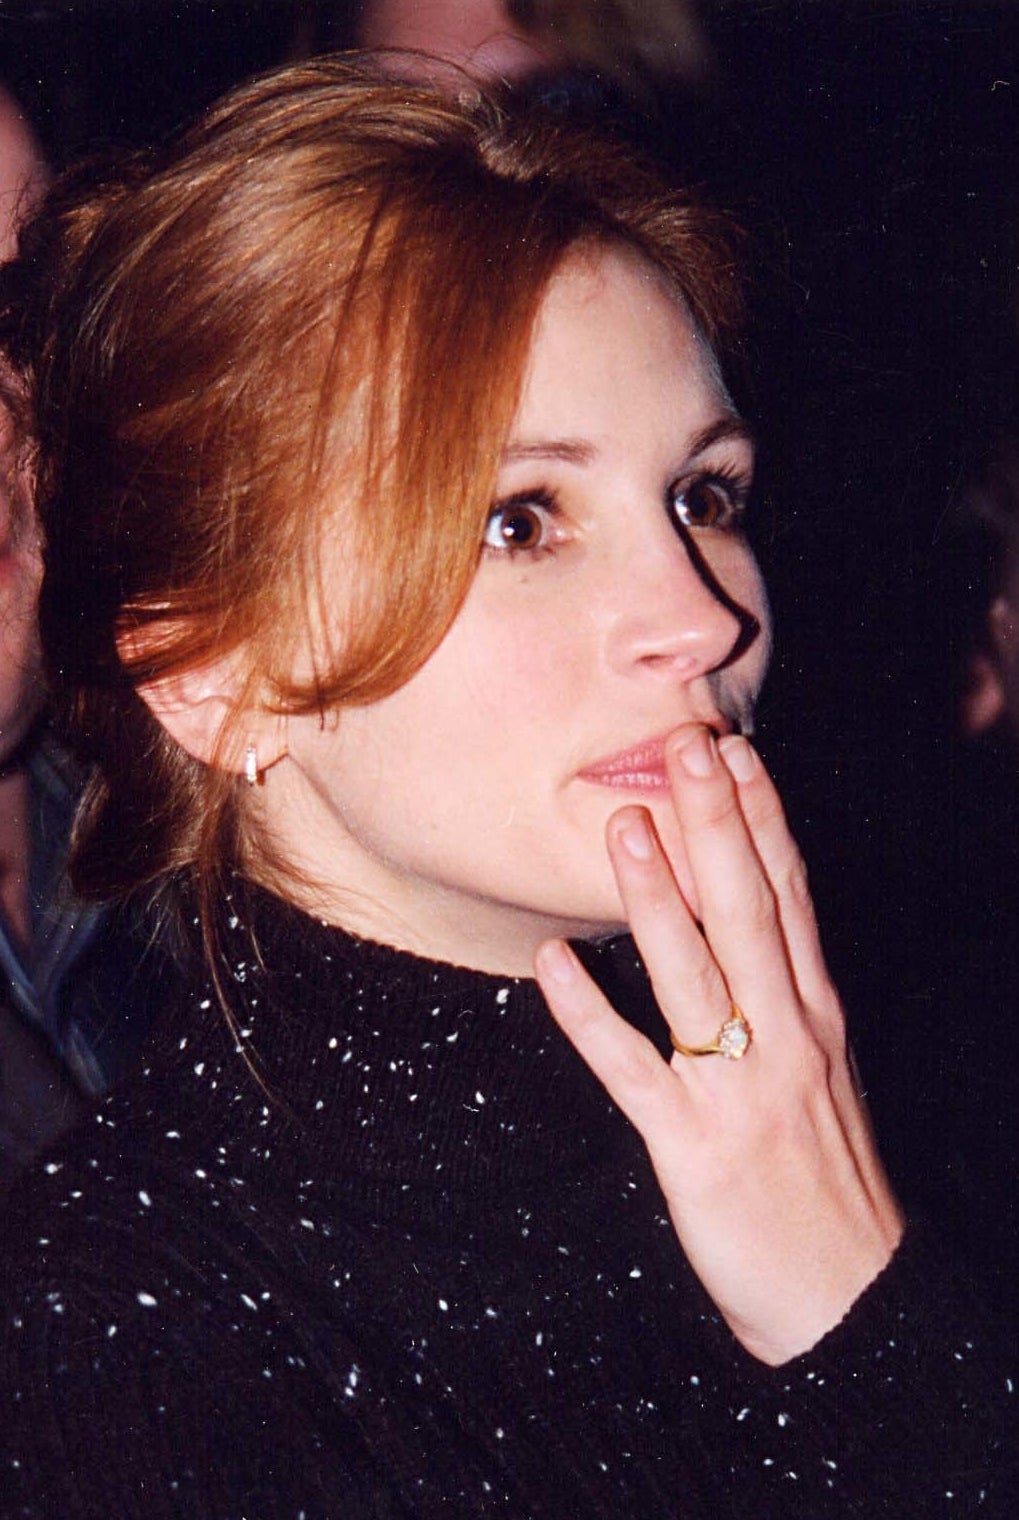 Close-up of Julia touching her face